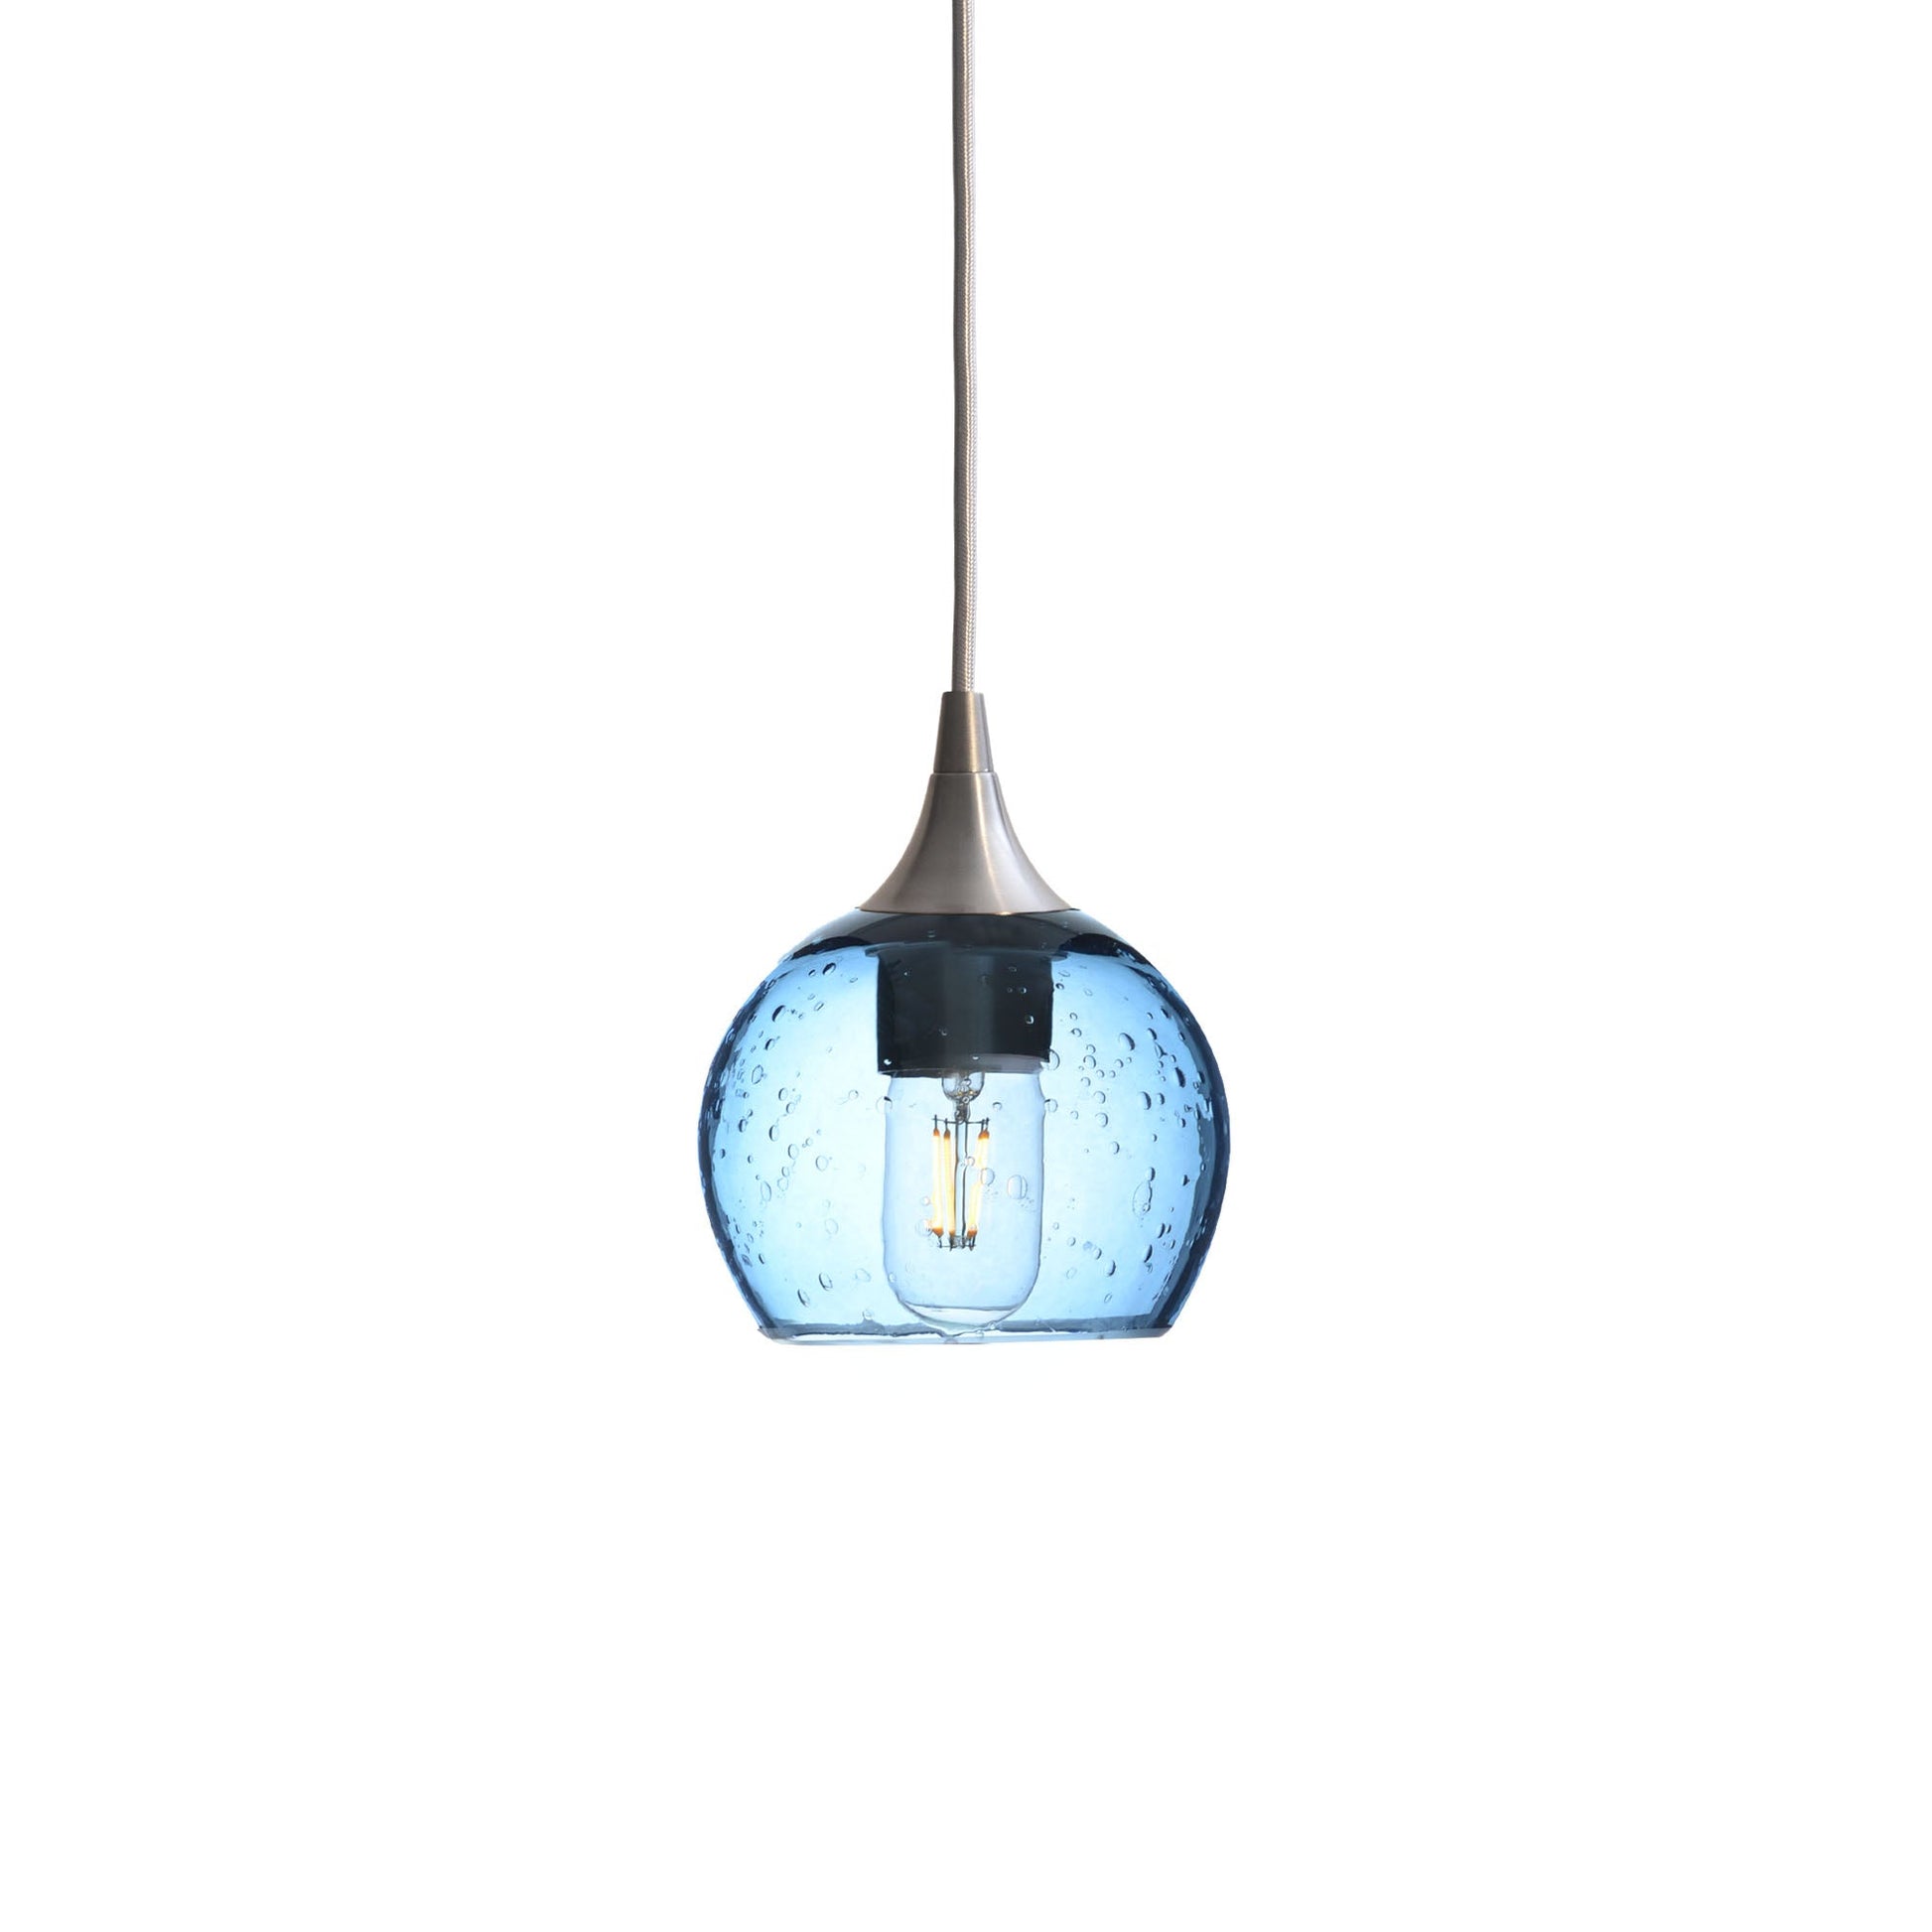 763 Lunar: Single Pendant Light-Glass-Bicycle Glass Co - Hotshop-Steel Blue-Brushed Nickel-Bicycle Glass Co